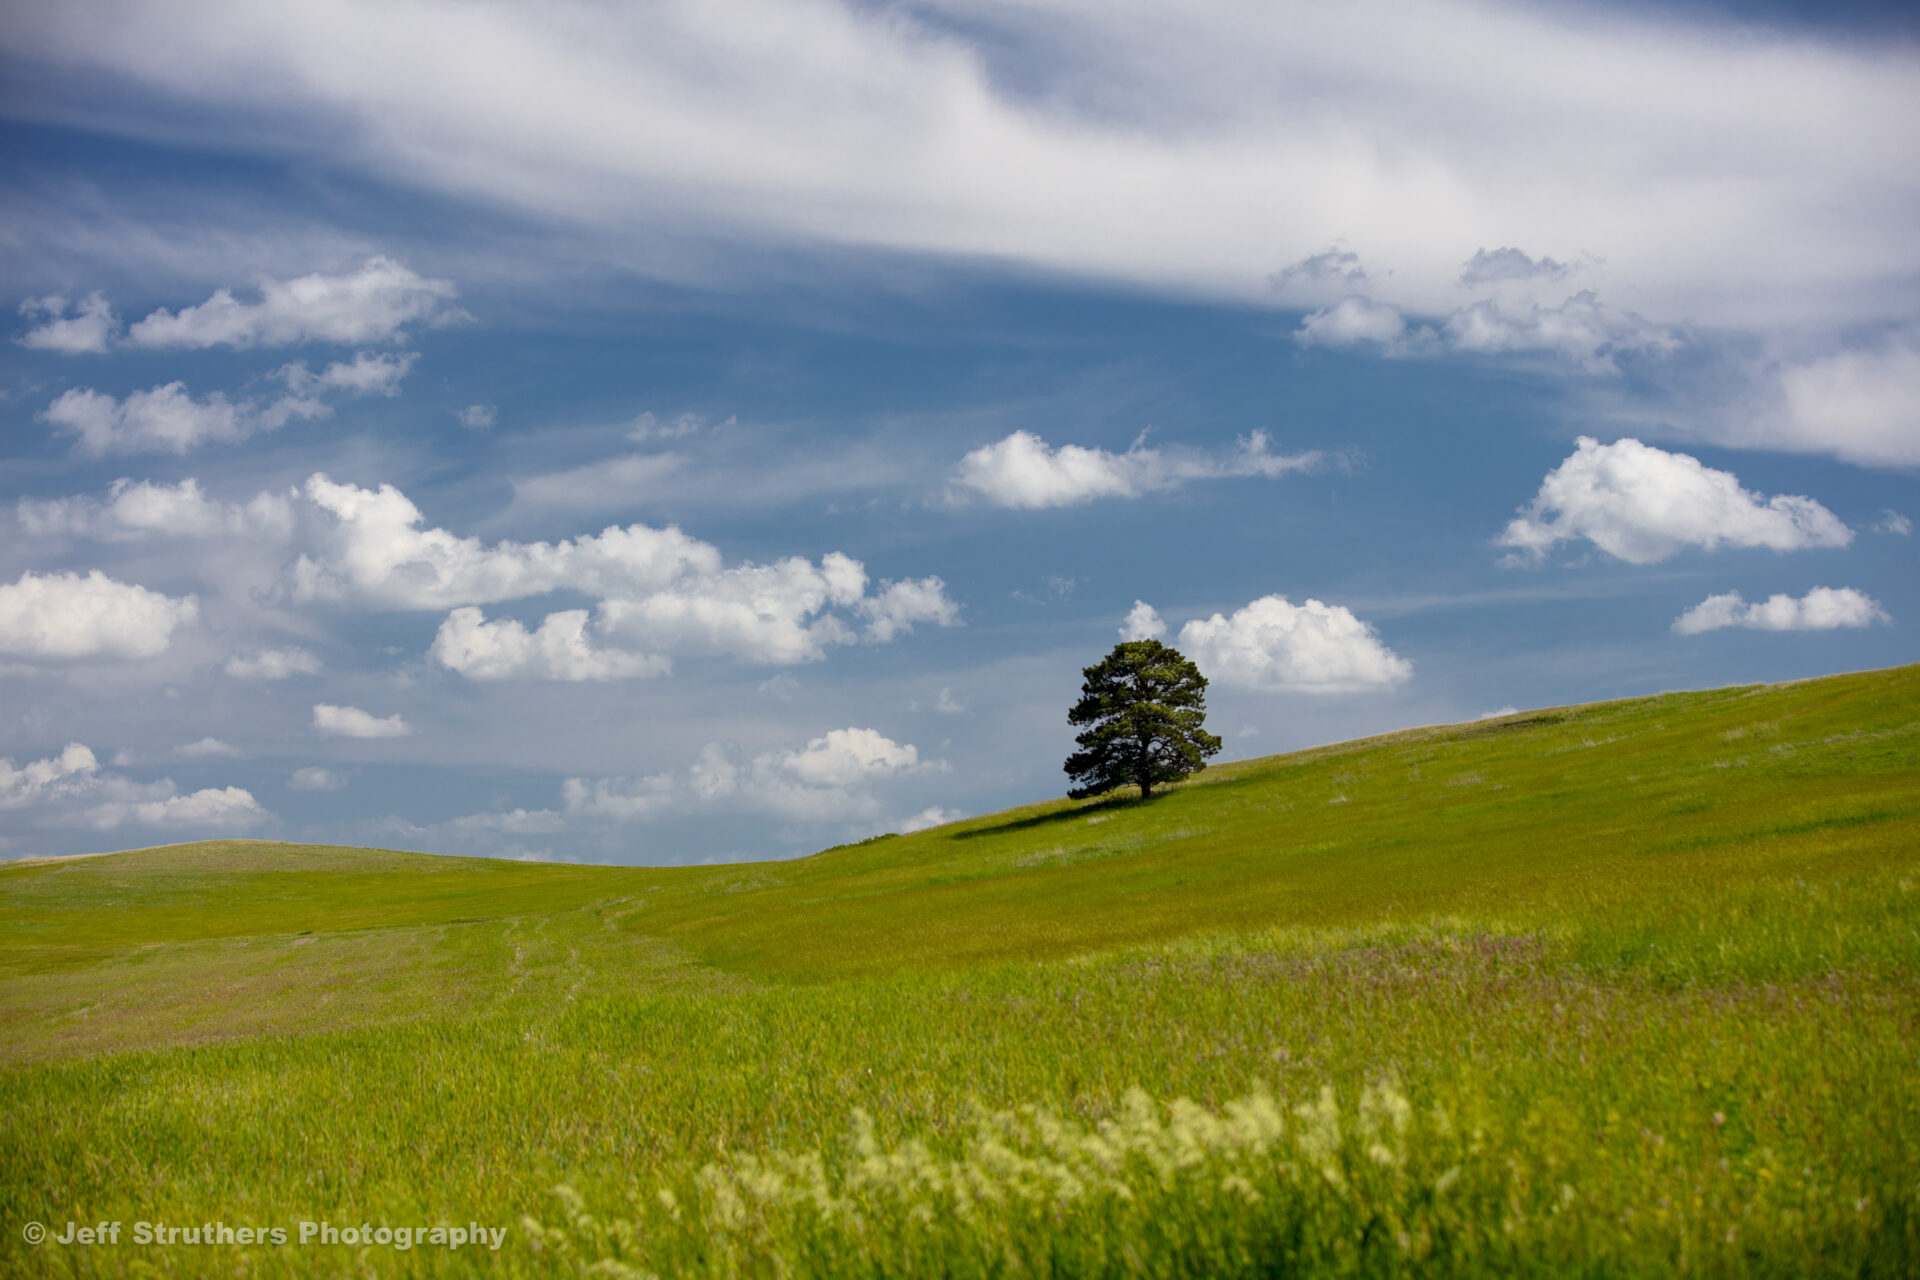 A lone tree in the middle of a green field.